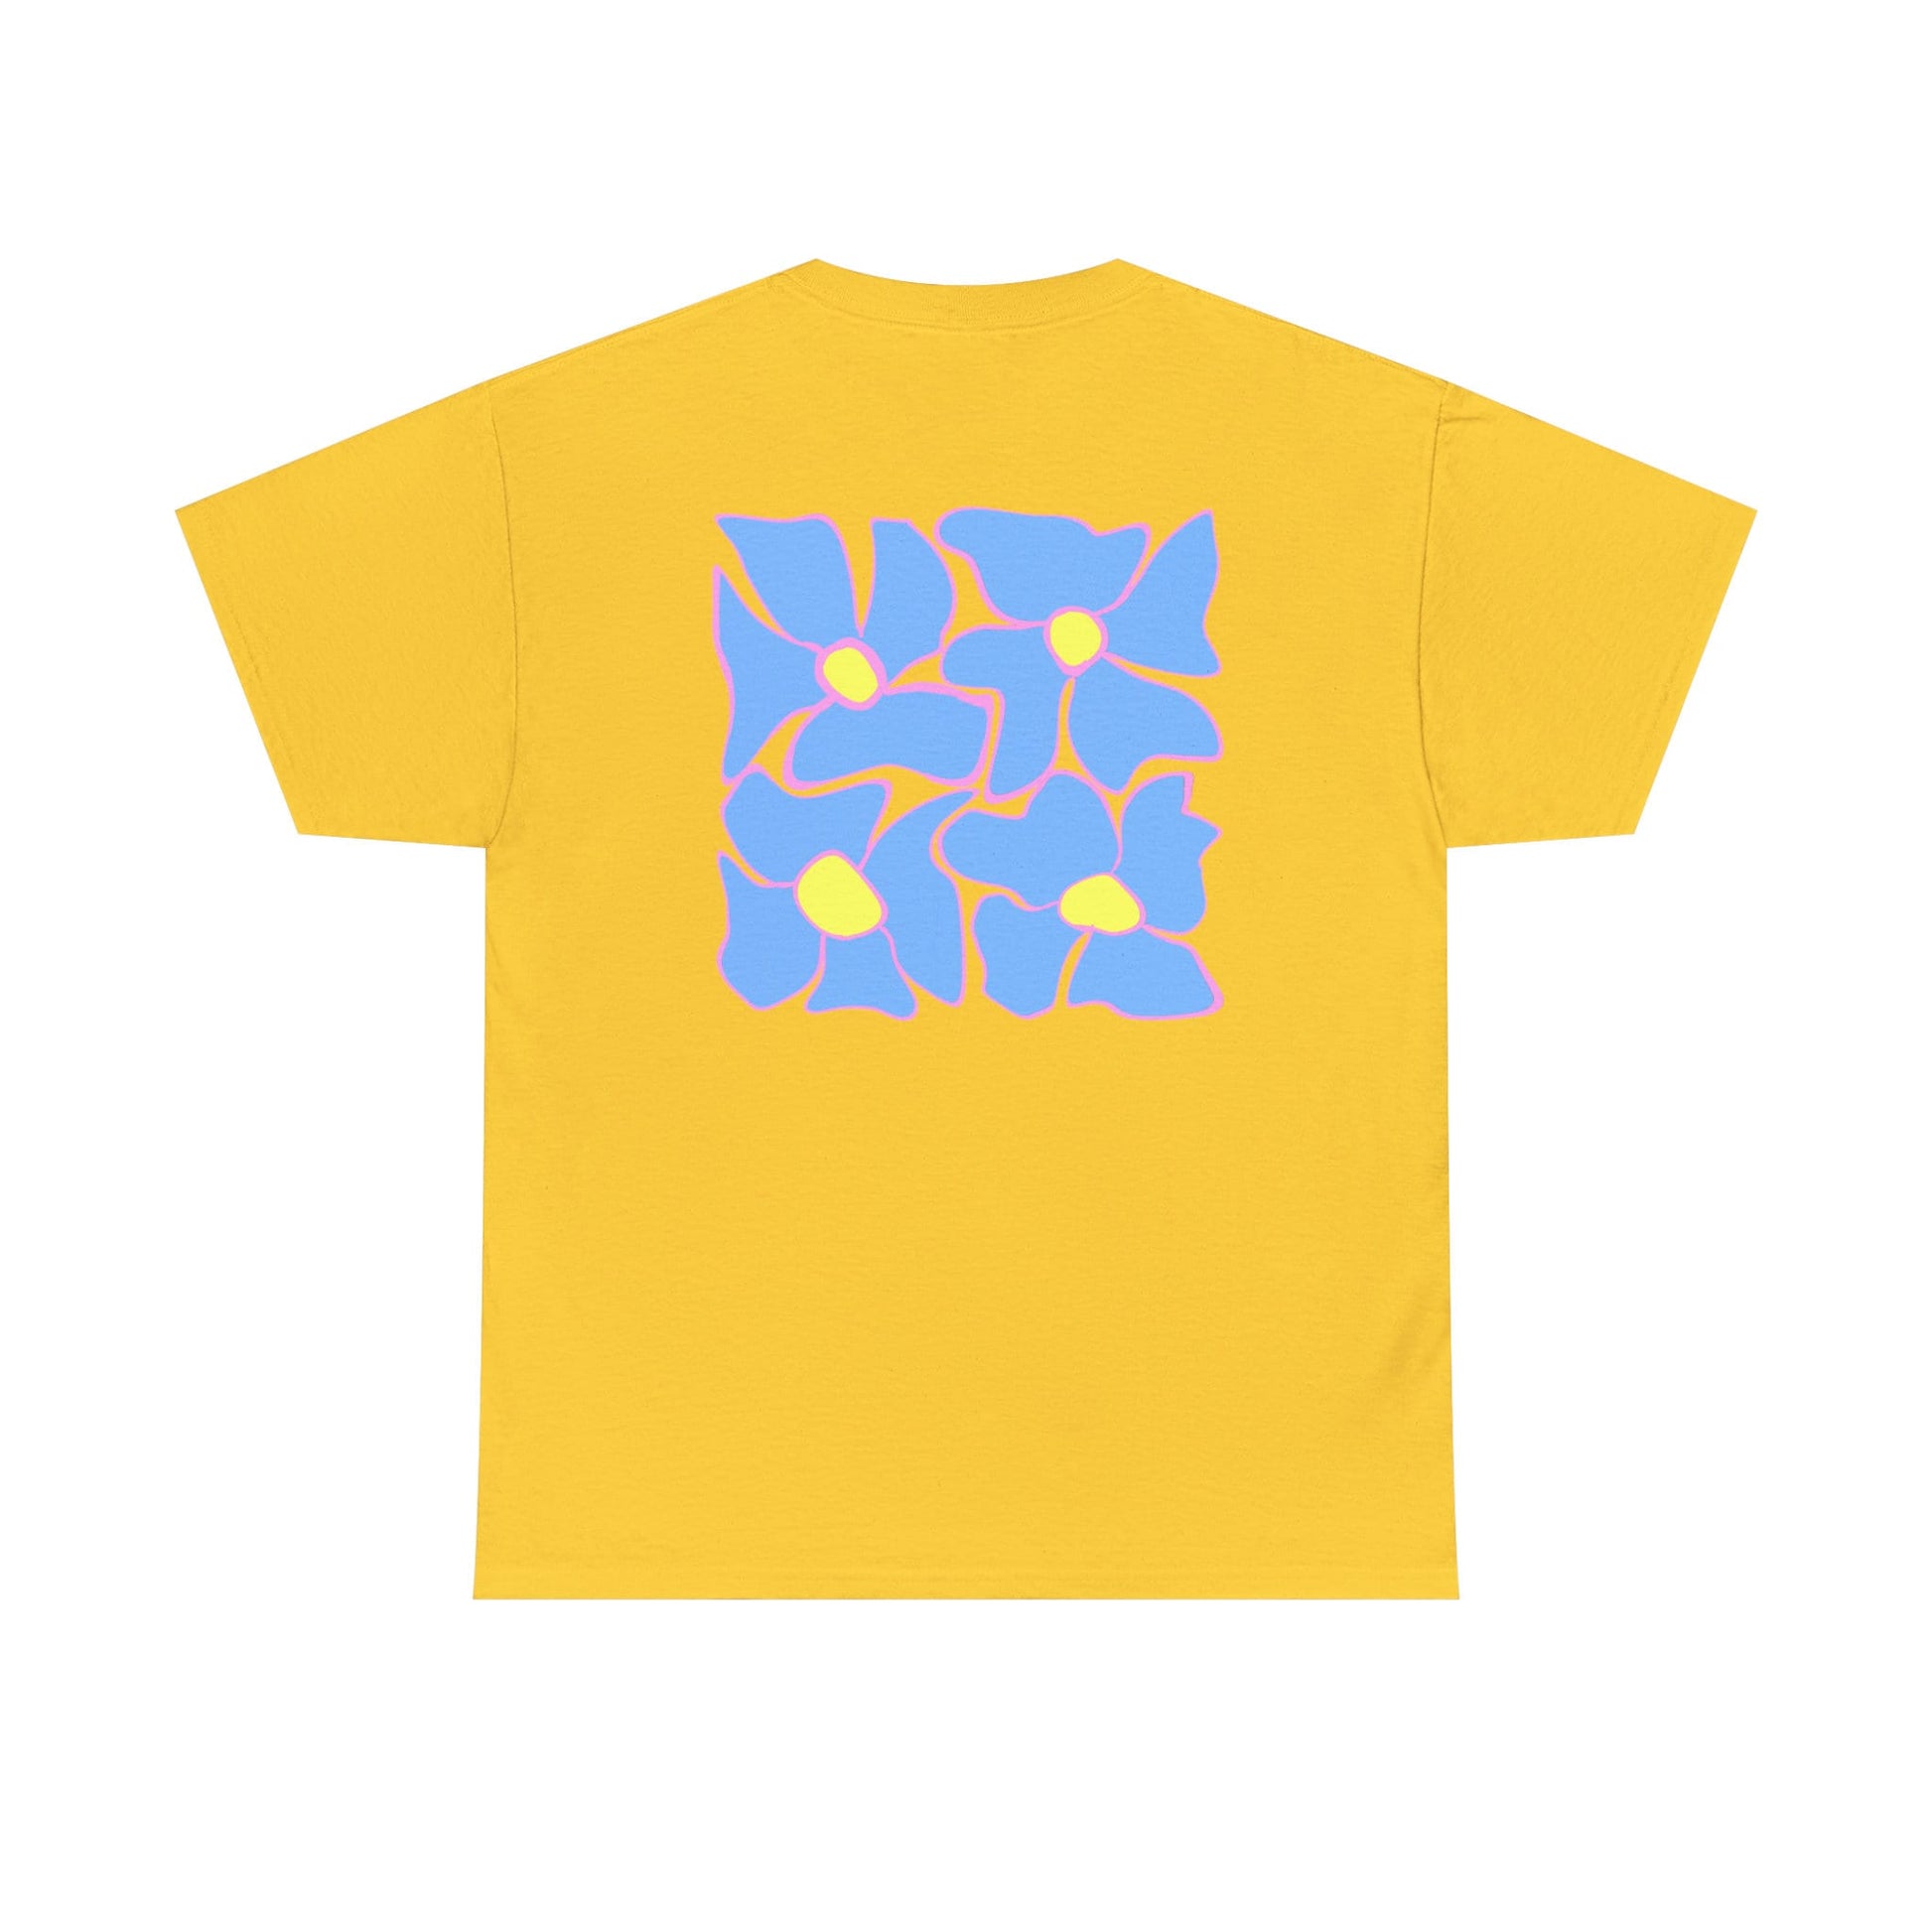 flowerz tee (design is on the back)